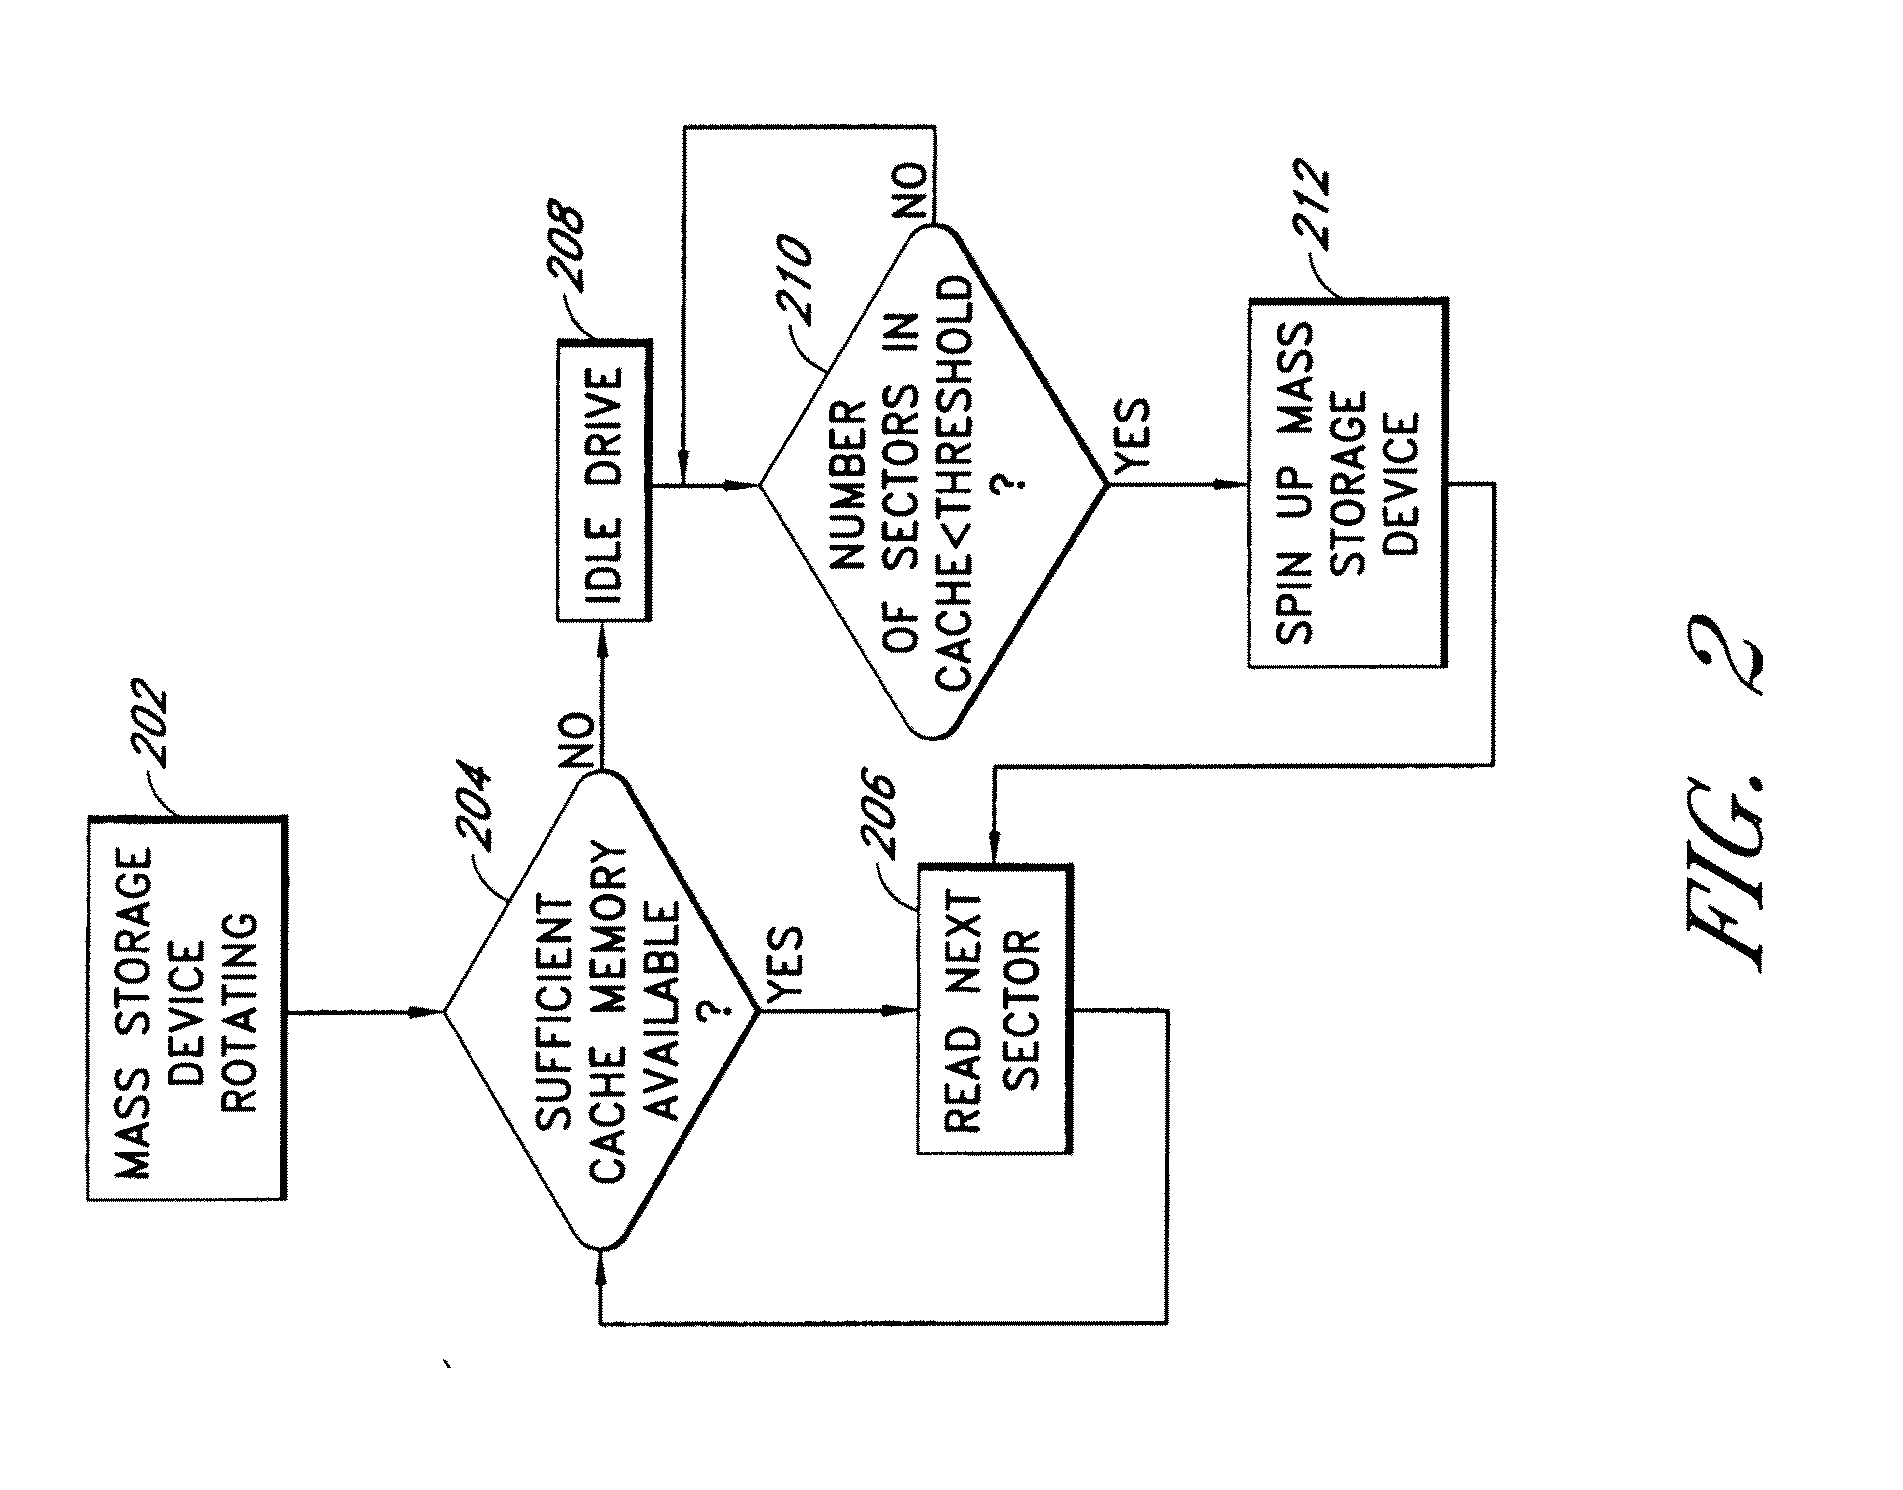 System and Method for Caching Multimedia Data